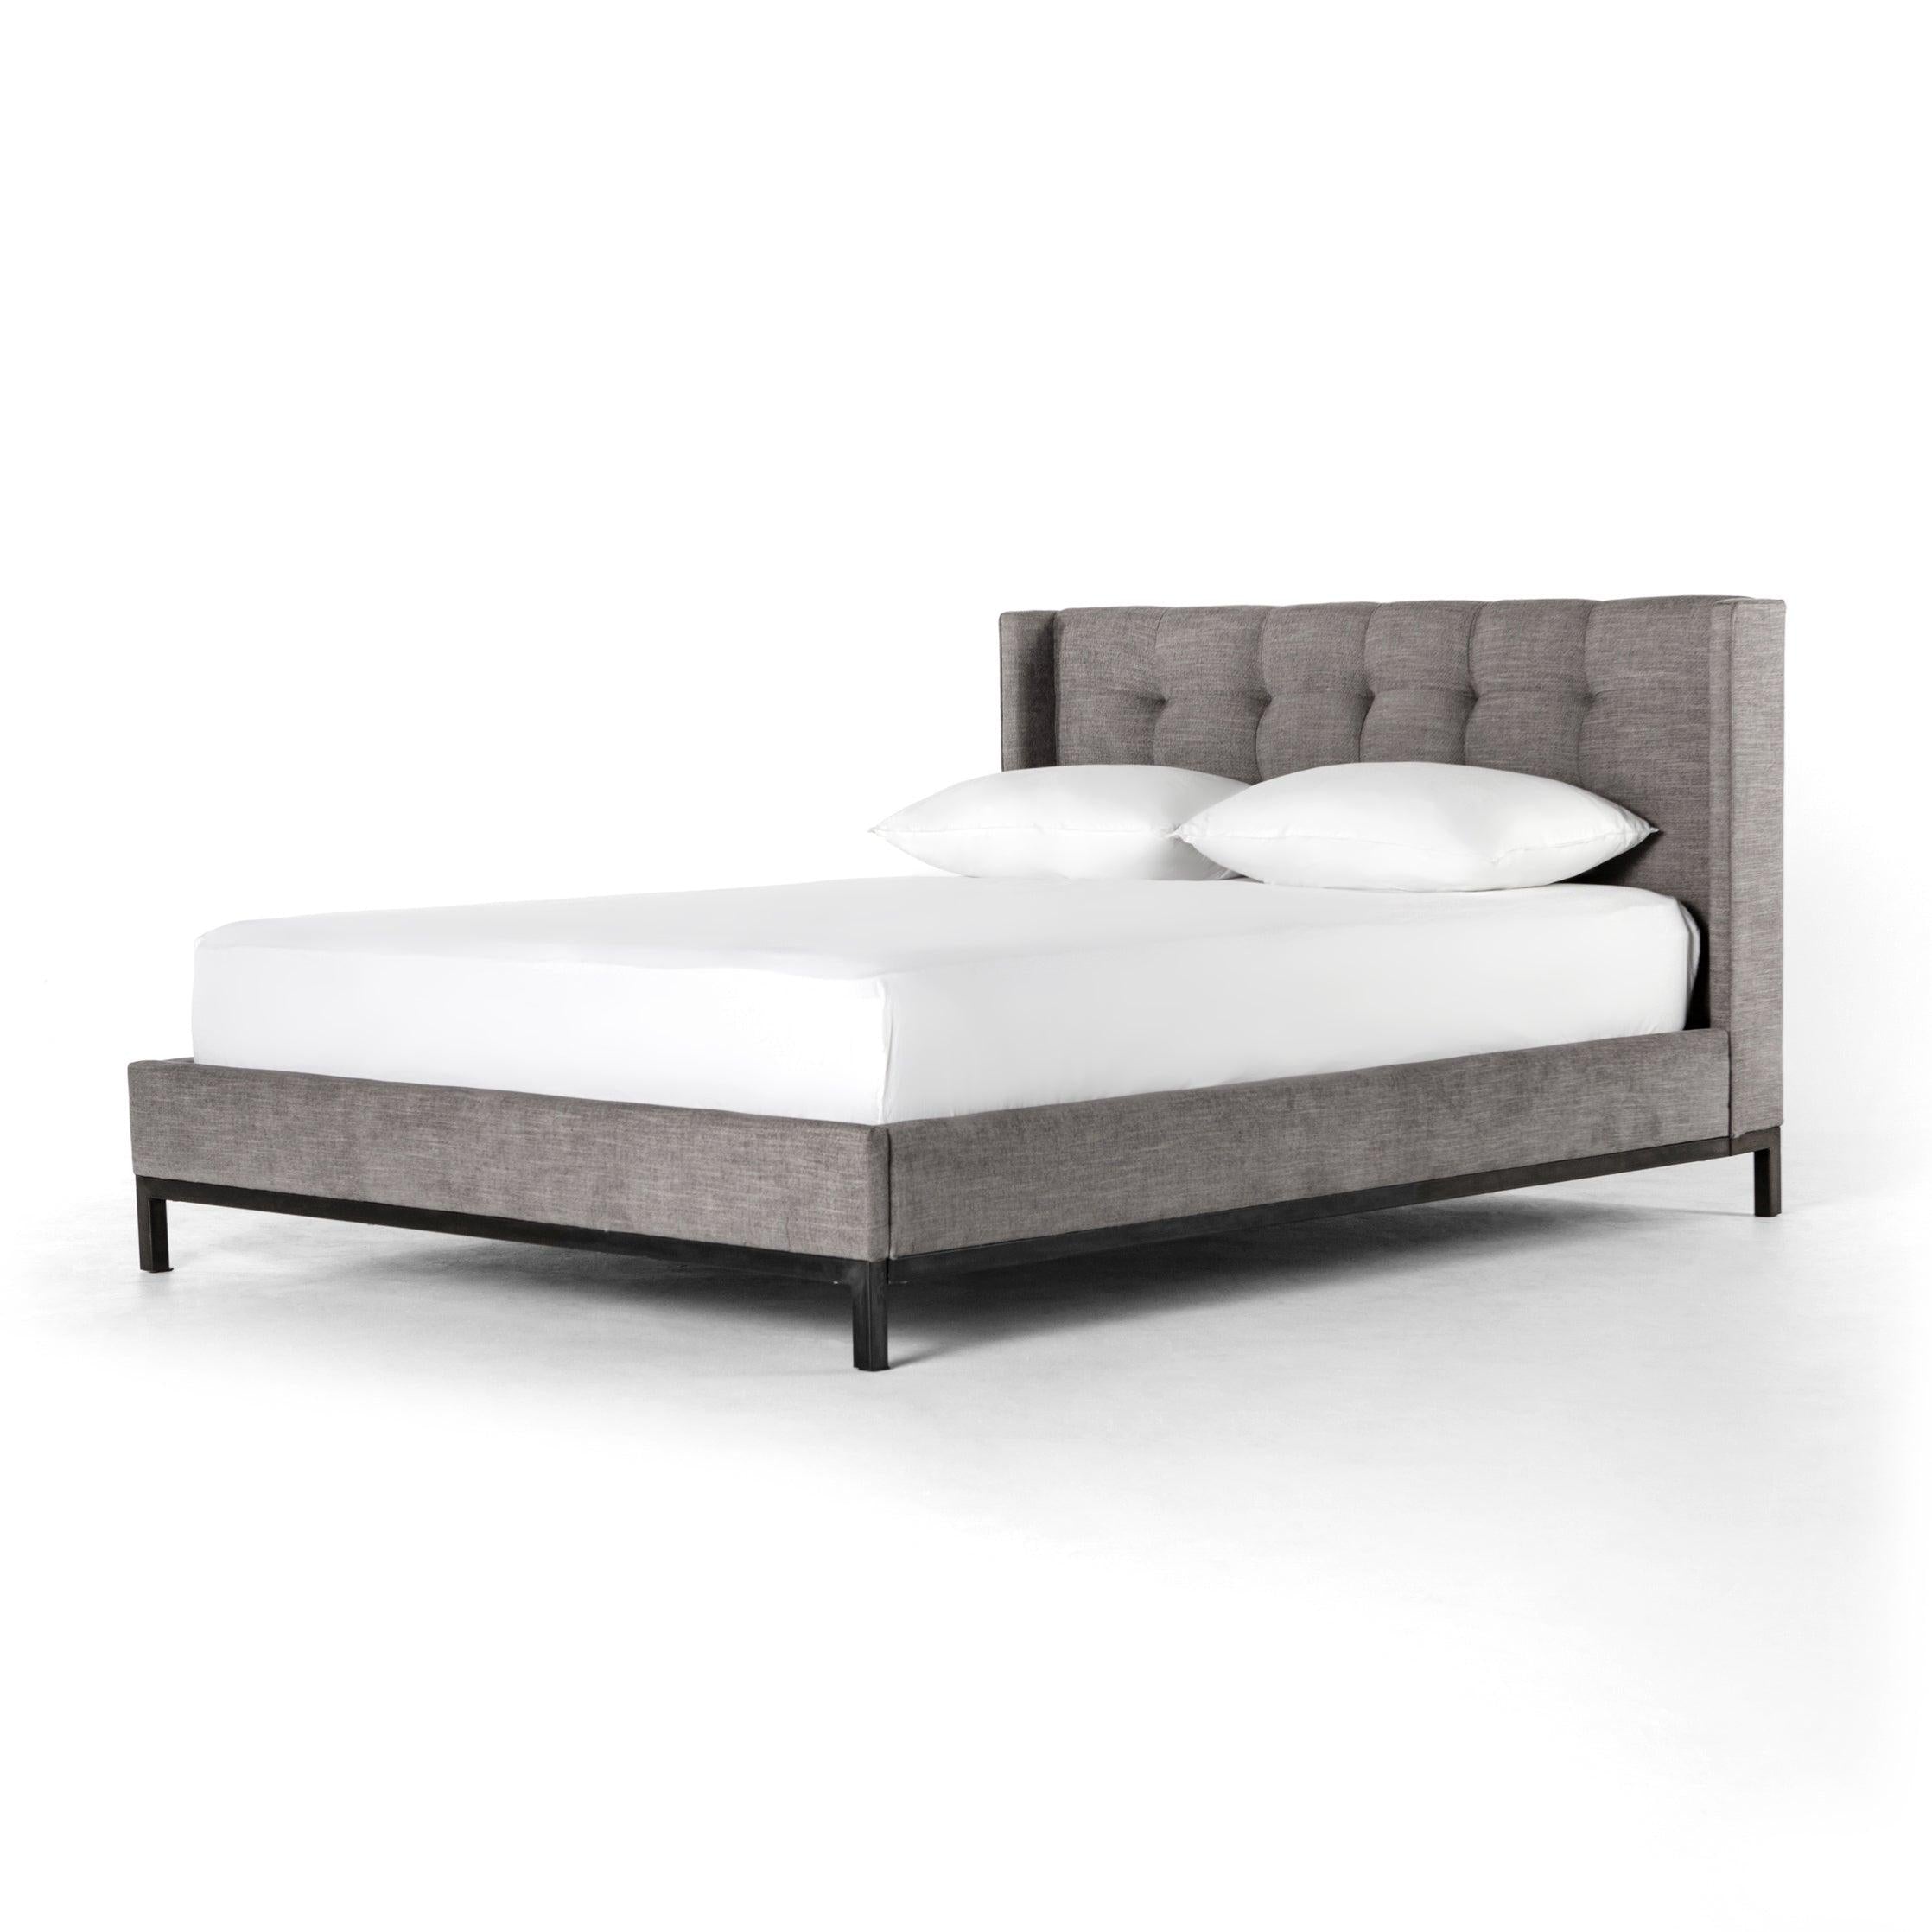 Newhall Bed, Harbor Grey - Reimagine Designs - bed, new